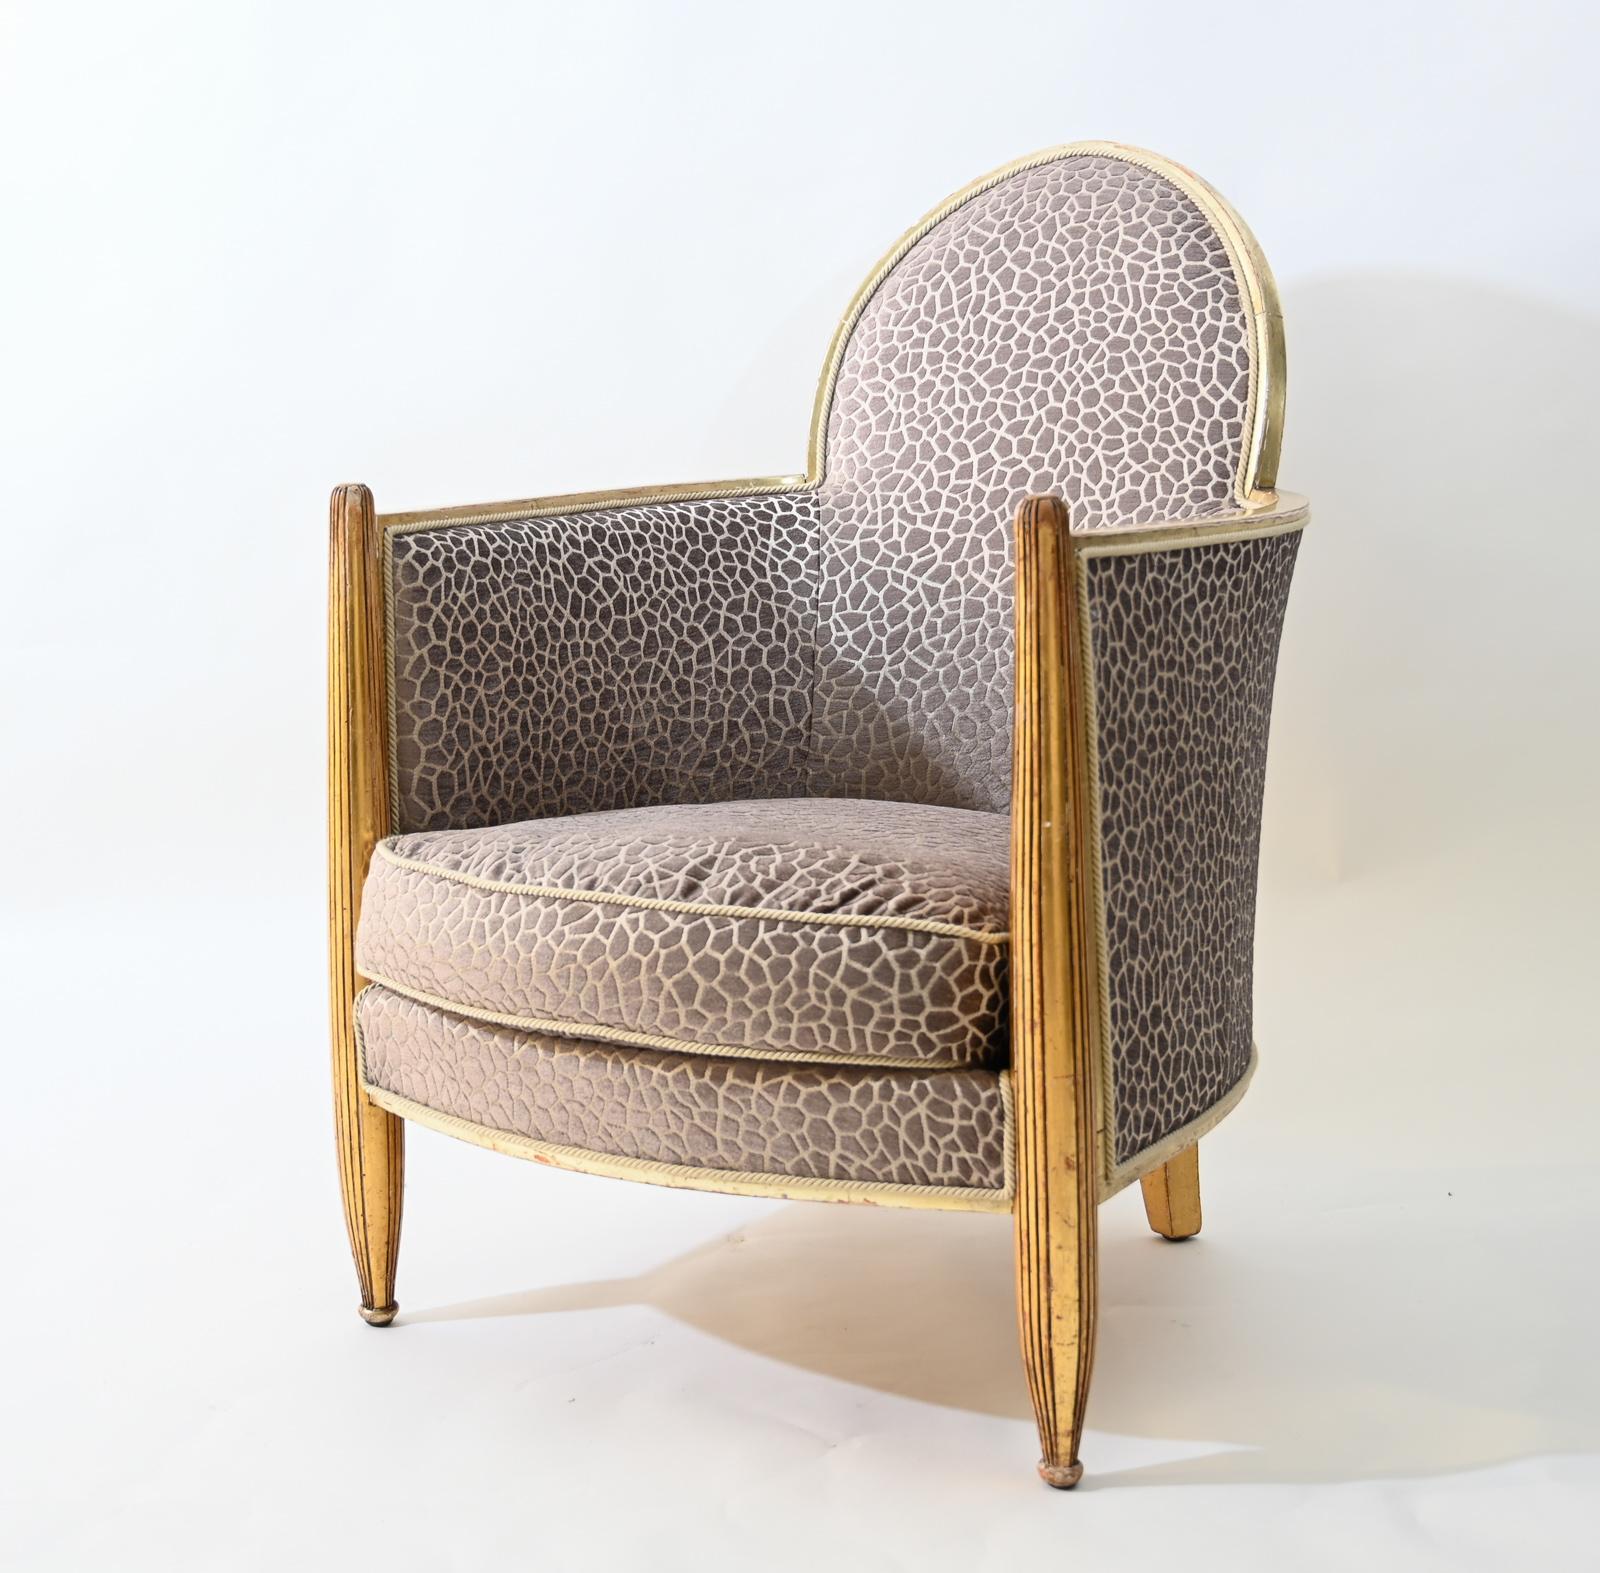 Art Deco club armchair in the Gothic style attributed to Paul Follot.

Original giltwood frame reupholstered in contemporary fabric

very faded stamp to the underside of the original linen

small sample of the original colorful fabric attached